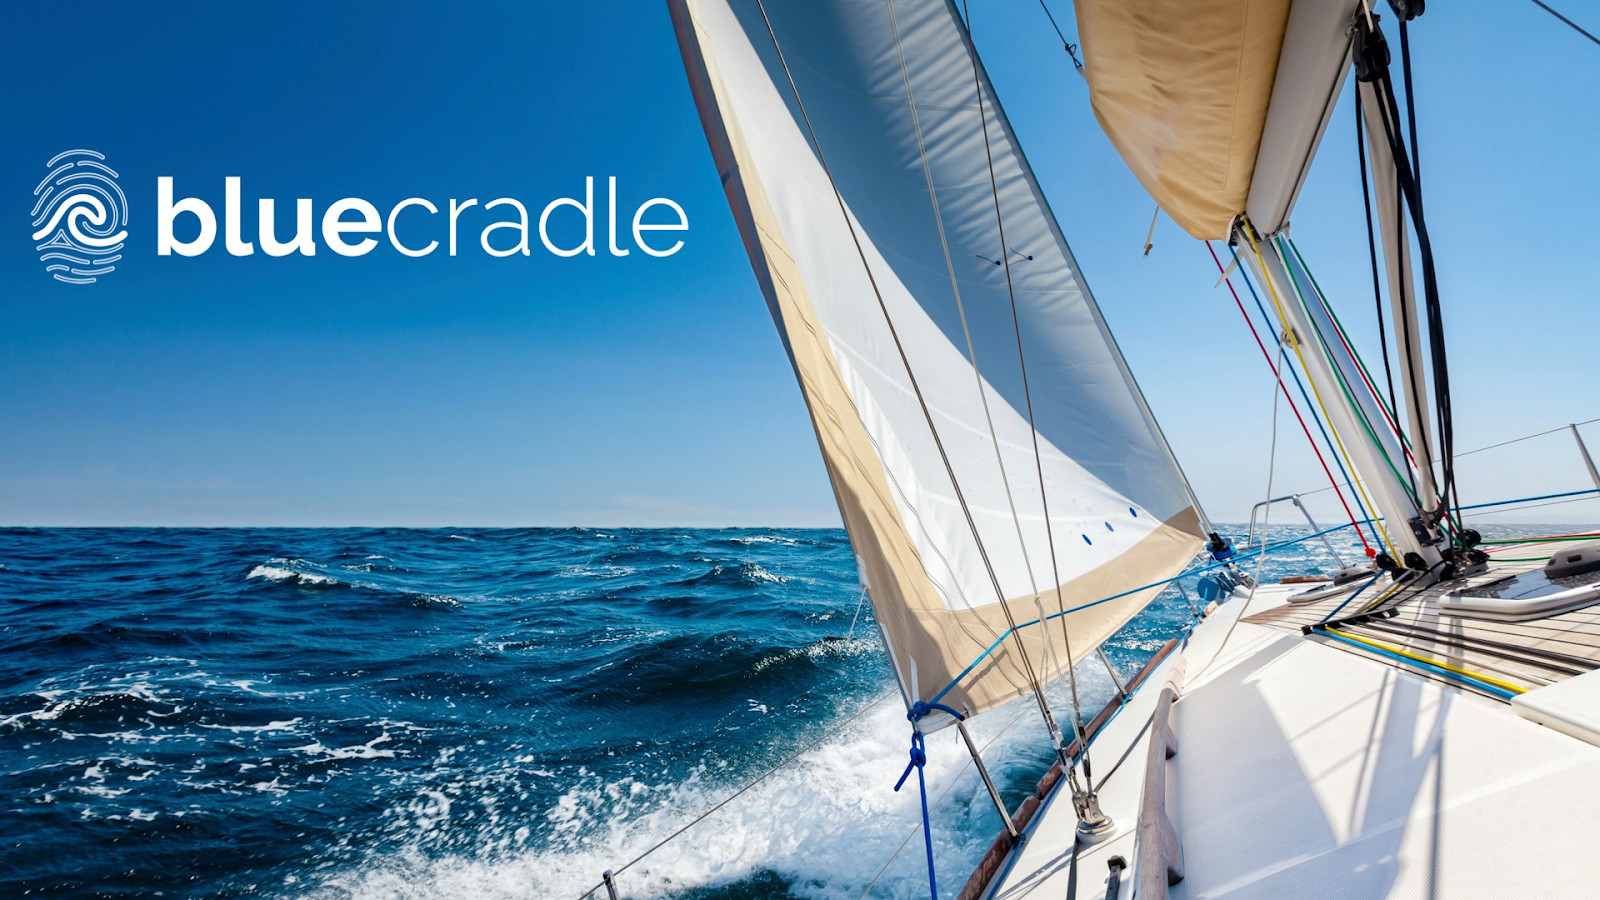 A sailboat on the ocean with the Blue Cradle logo